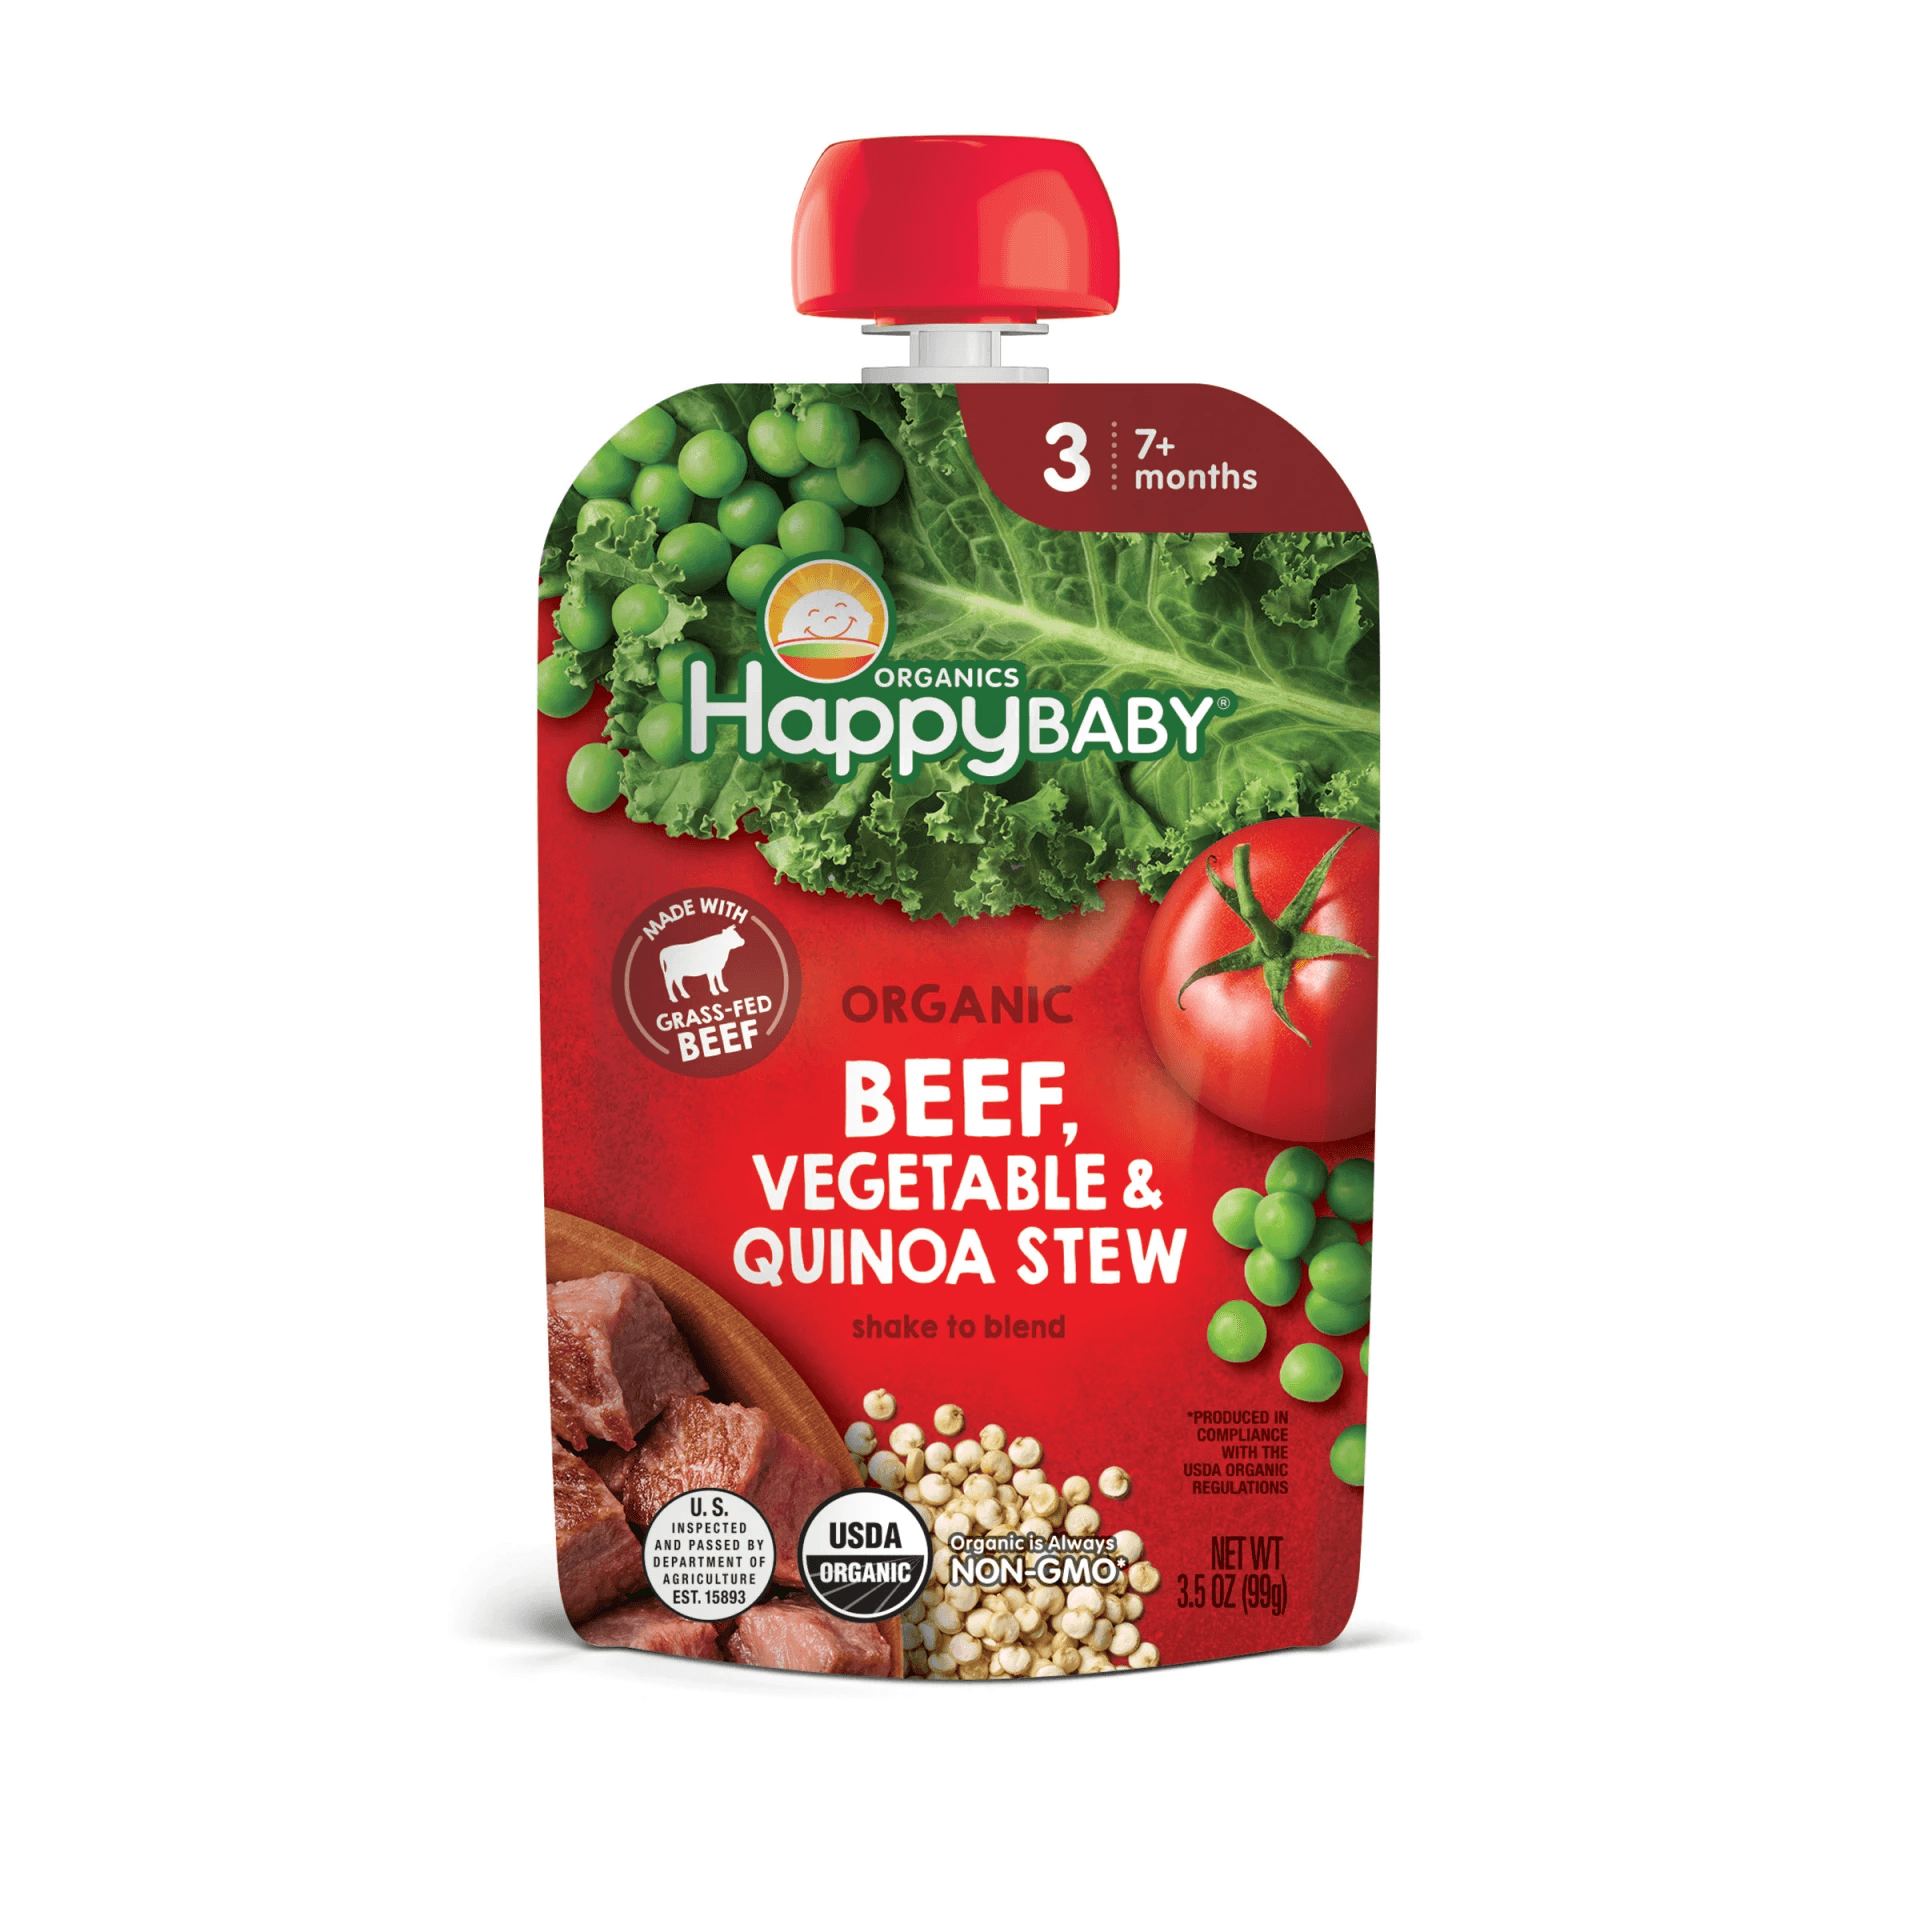 Happy Baby S3 - Savory Blends Grass-Fed Beef Vegetable & Quinoa Stew 3.5Oz pouch 16 units per case 3.5 oz